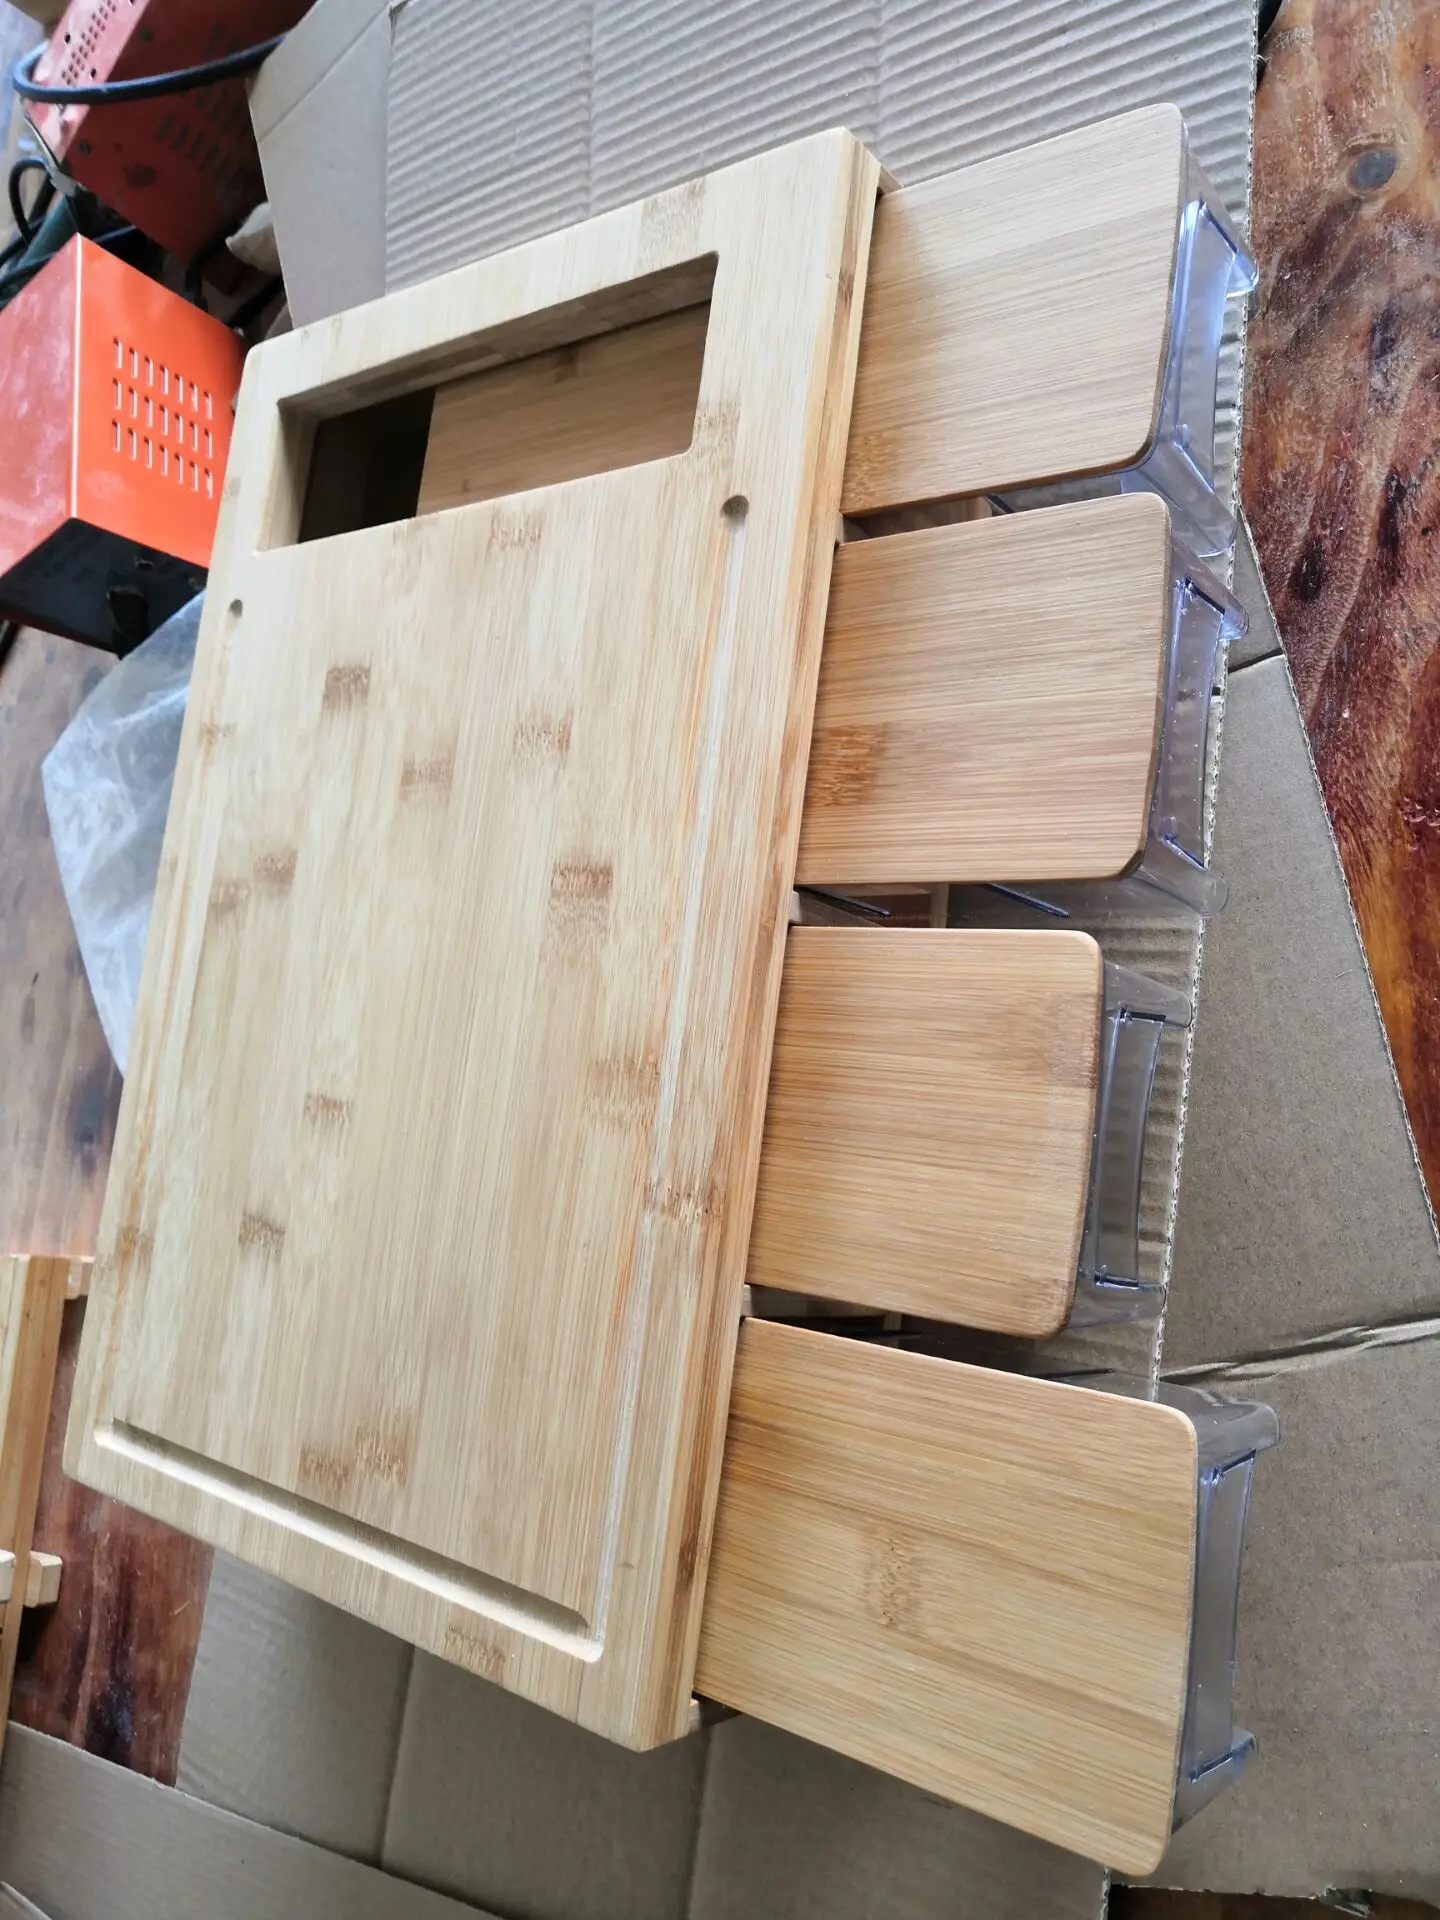 Multi-functional cutting board Comes with 4 Slicers and 4 draws Bamboo Cutting Board With Trays and LIDS